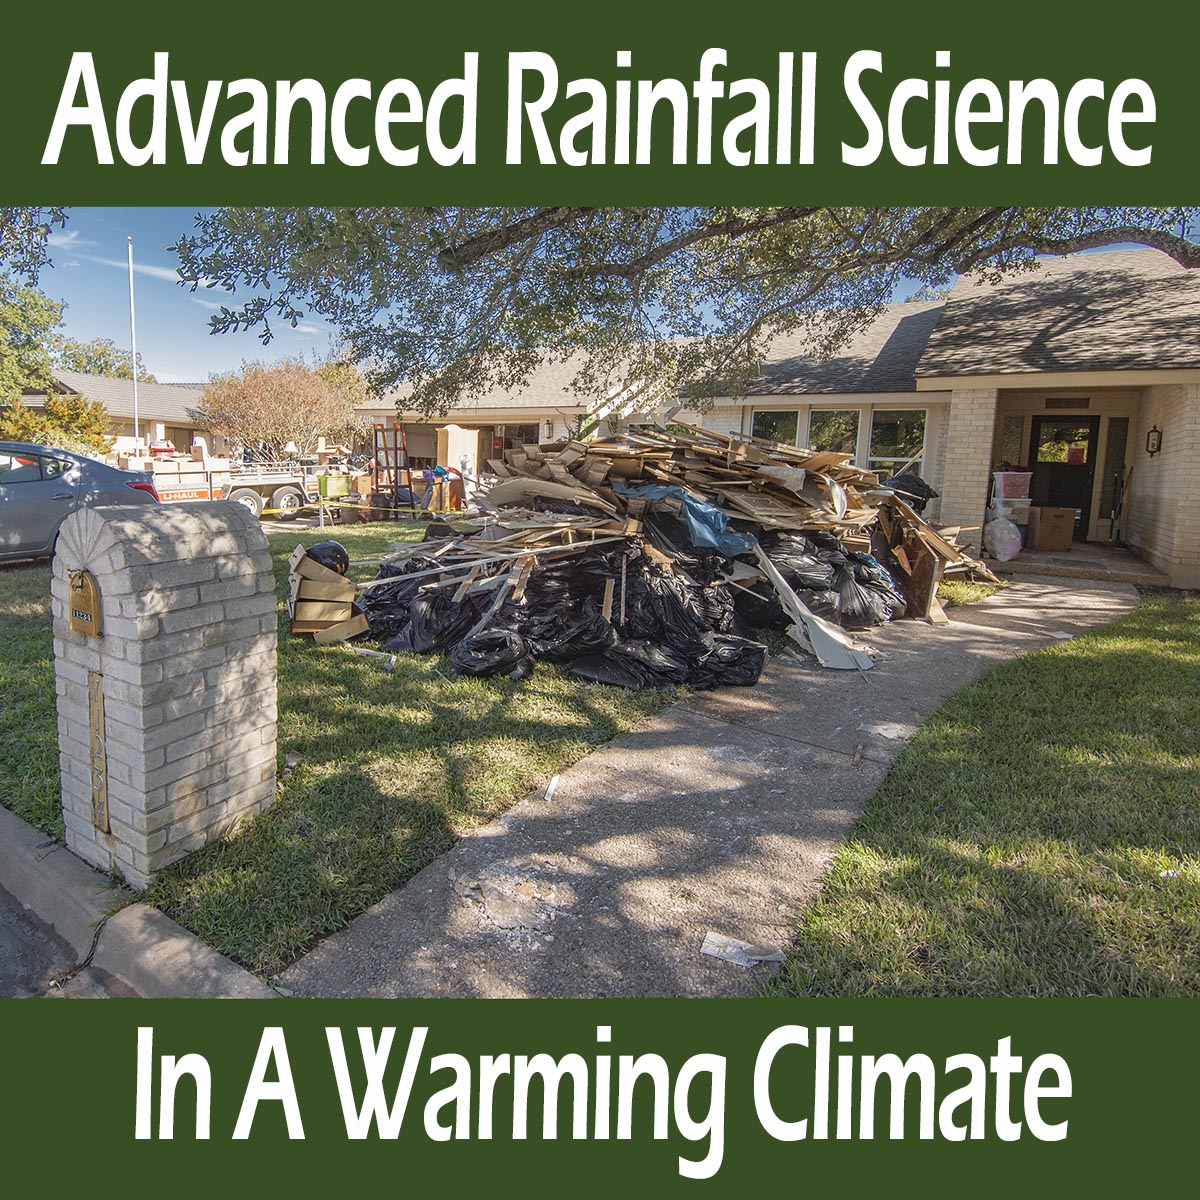 Advanced Rainfall Science in a Warming Climate